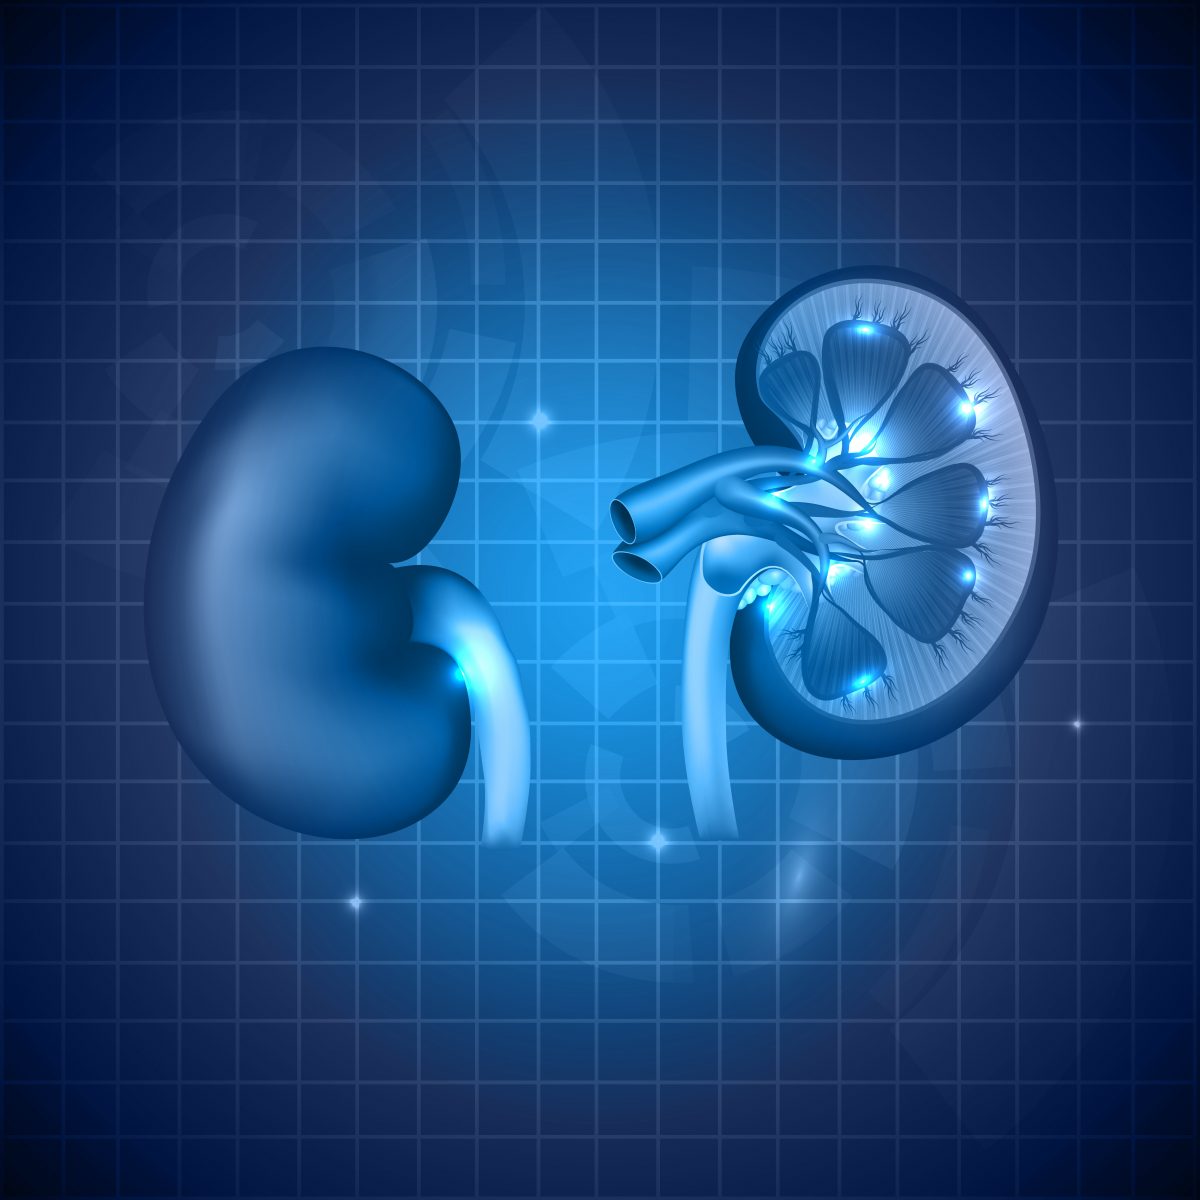 Better Kidney Transplant Outcomes Found Among HIV Patients in Comparison to Hepatitis C Patients